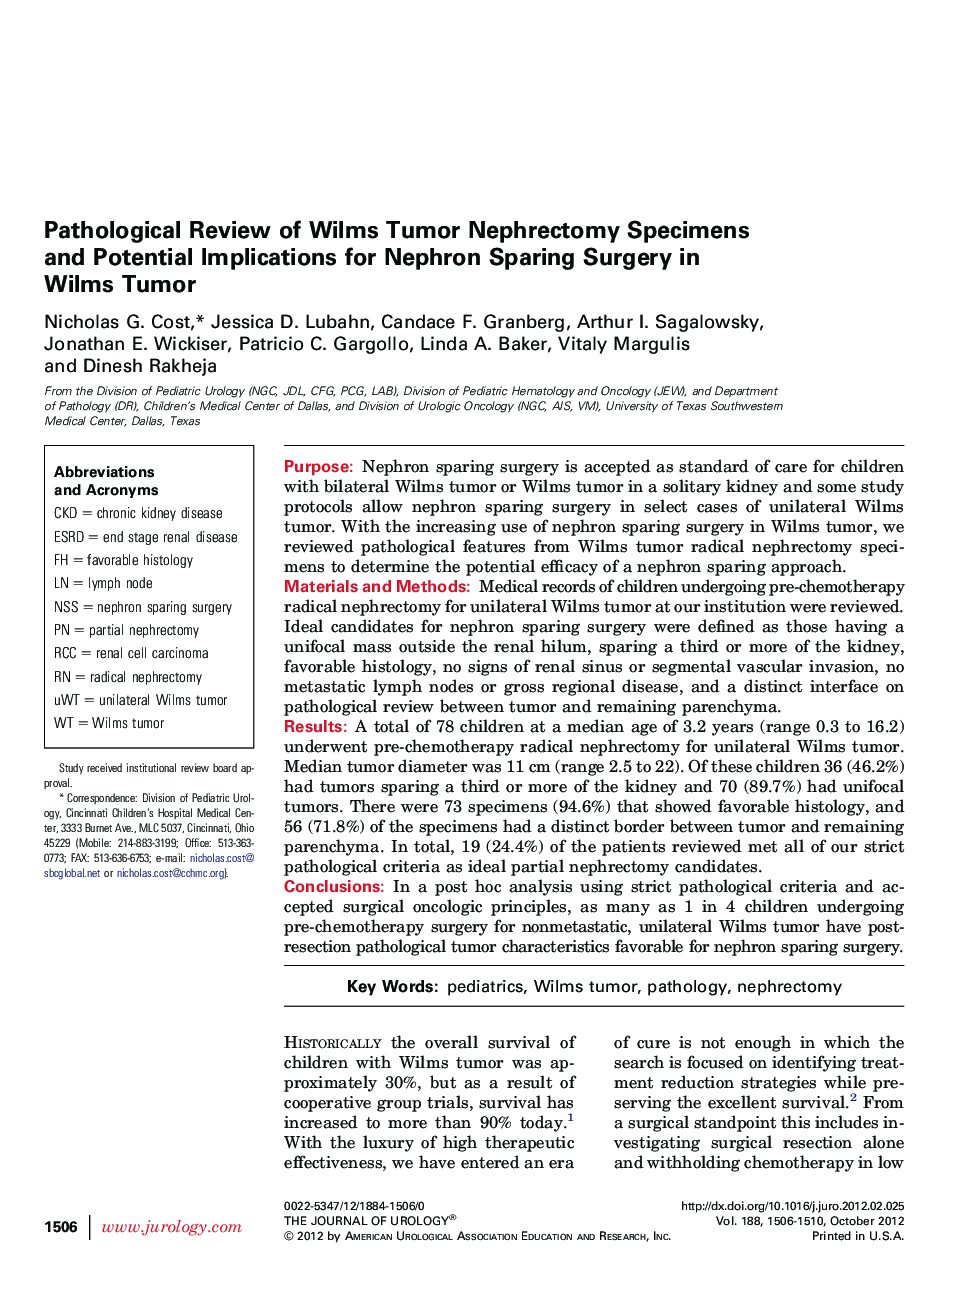 Pathological Review of Wilms Tumor Nephrectomy Specimens and Potential Implications for Nephron Sparing Surgery in Wilms Tumor 